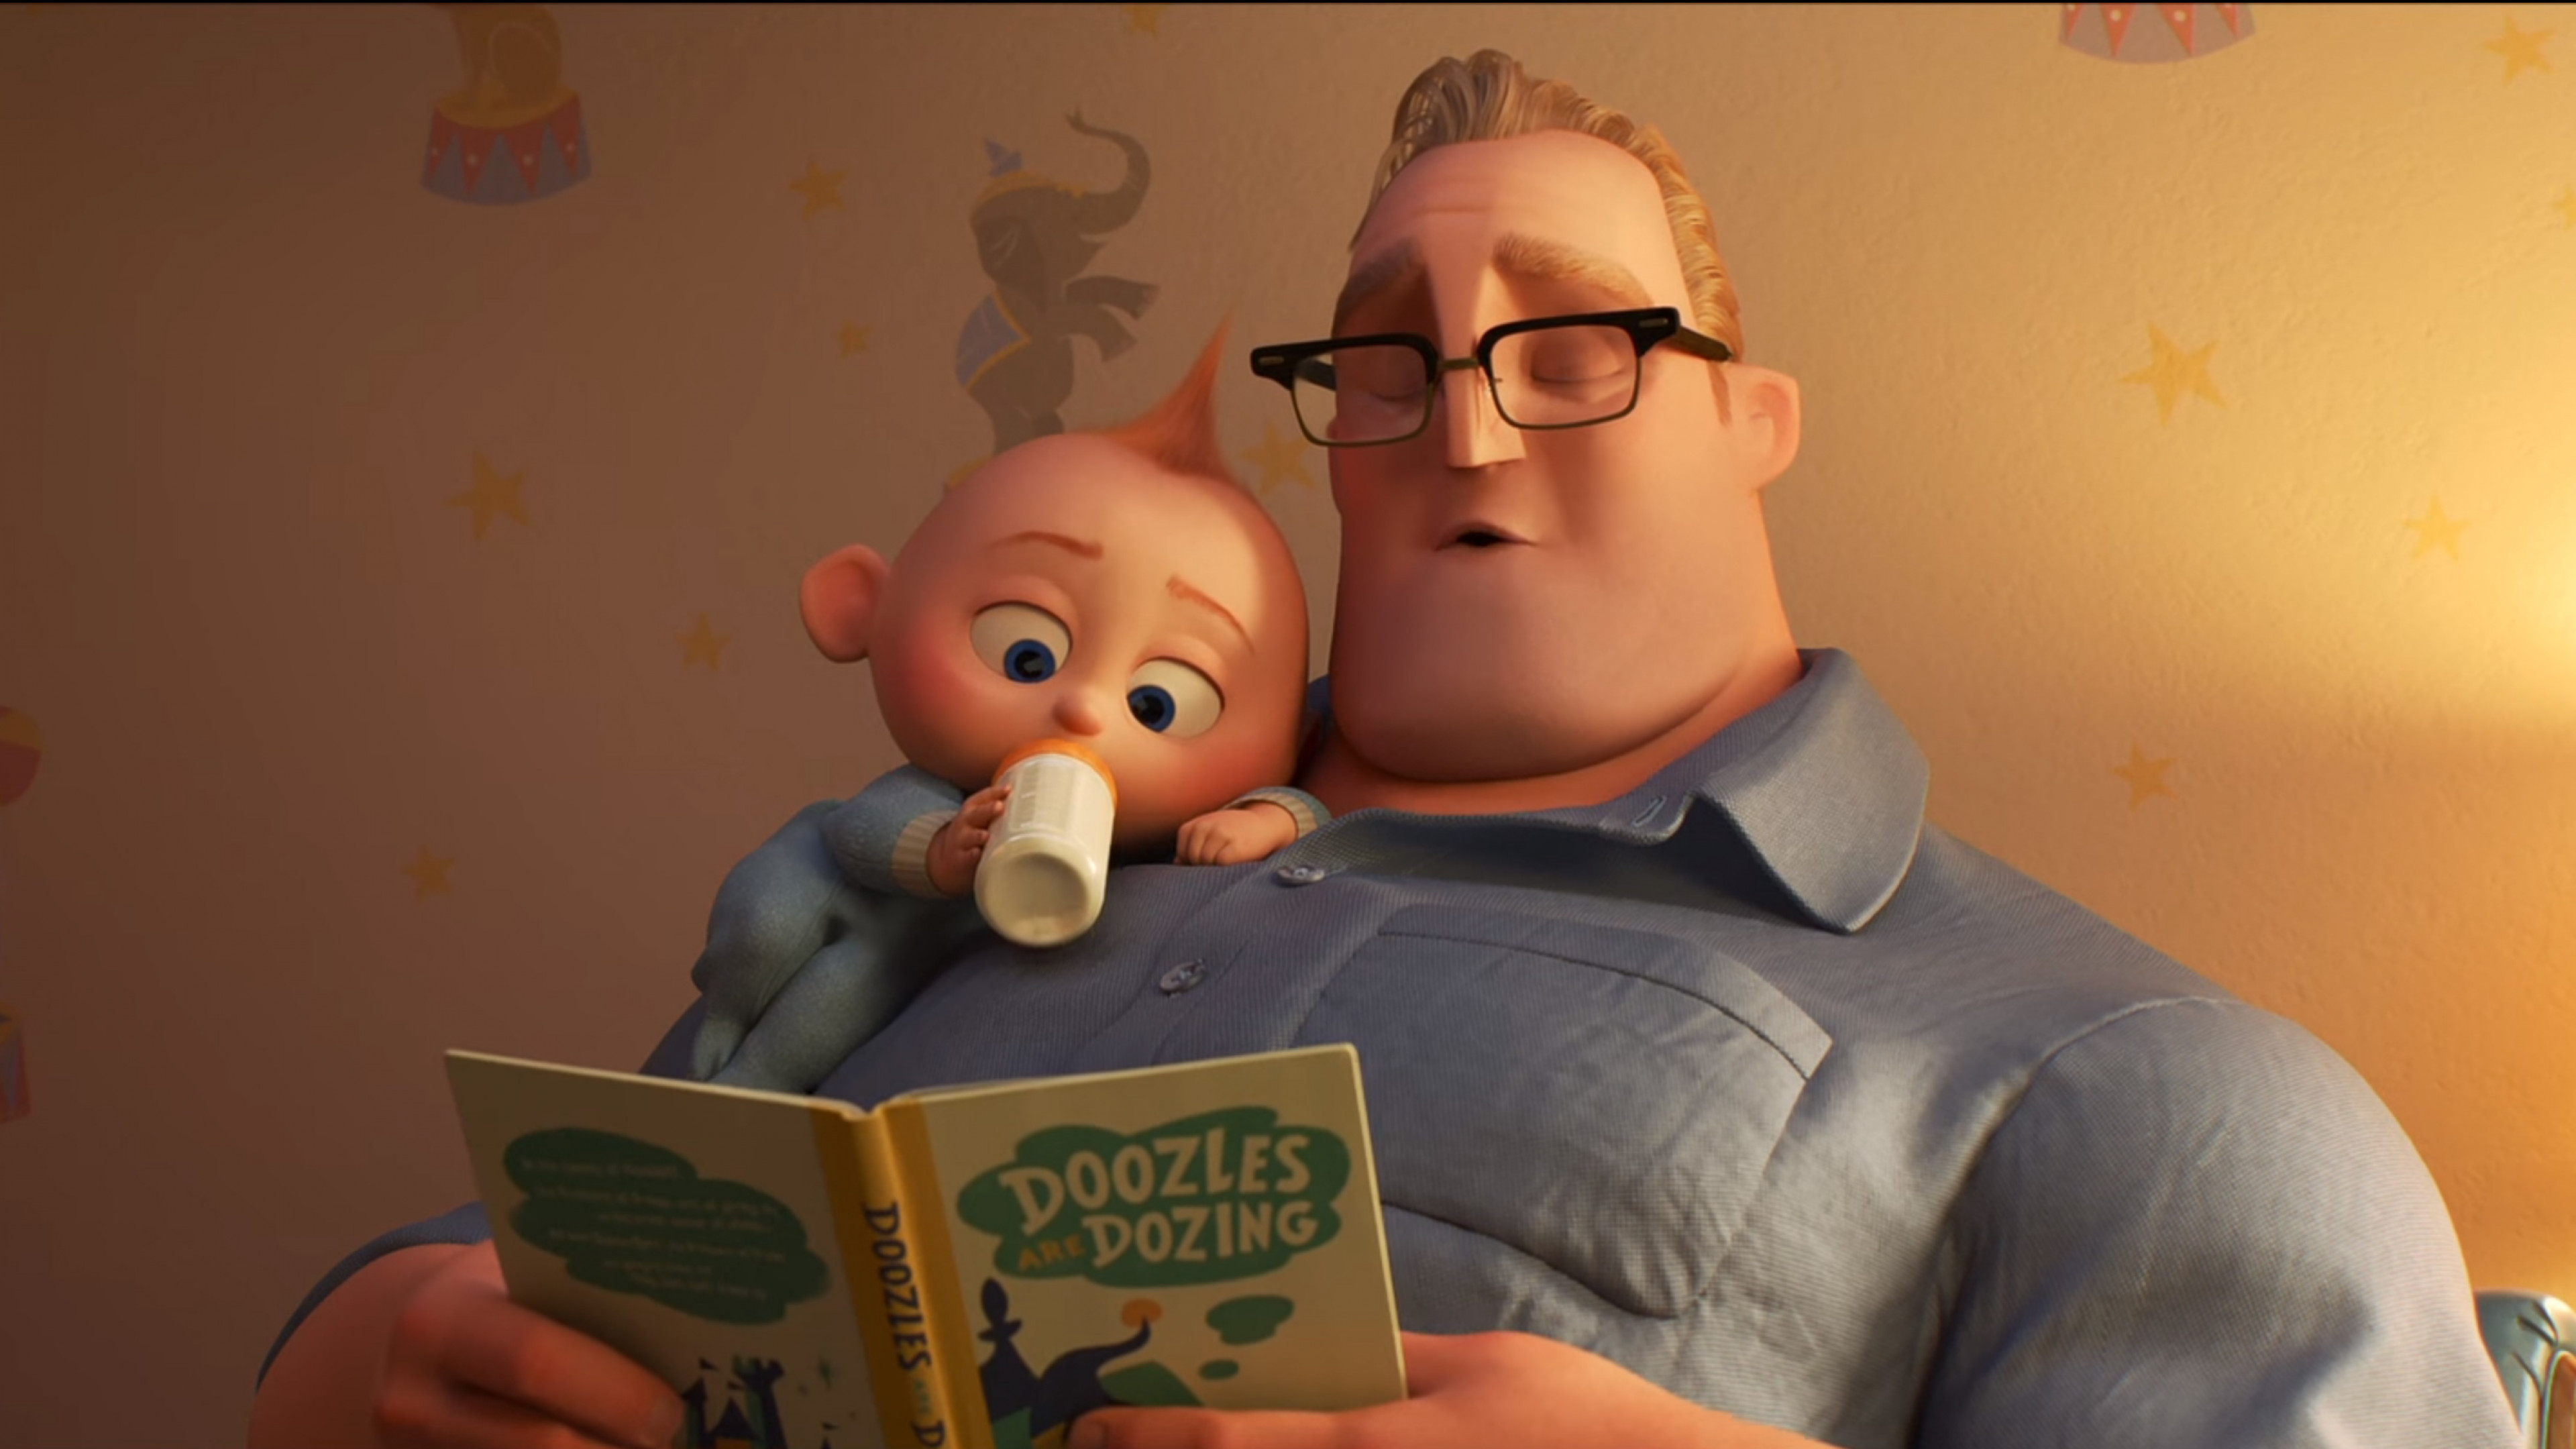 Wallpaper The Incredibles 2, 4k, Movies #17539